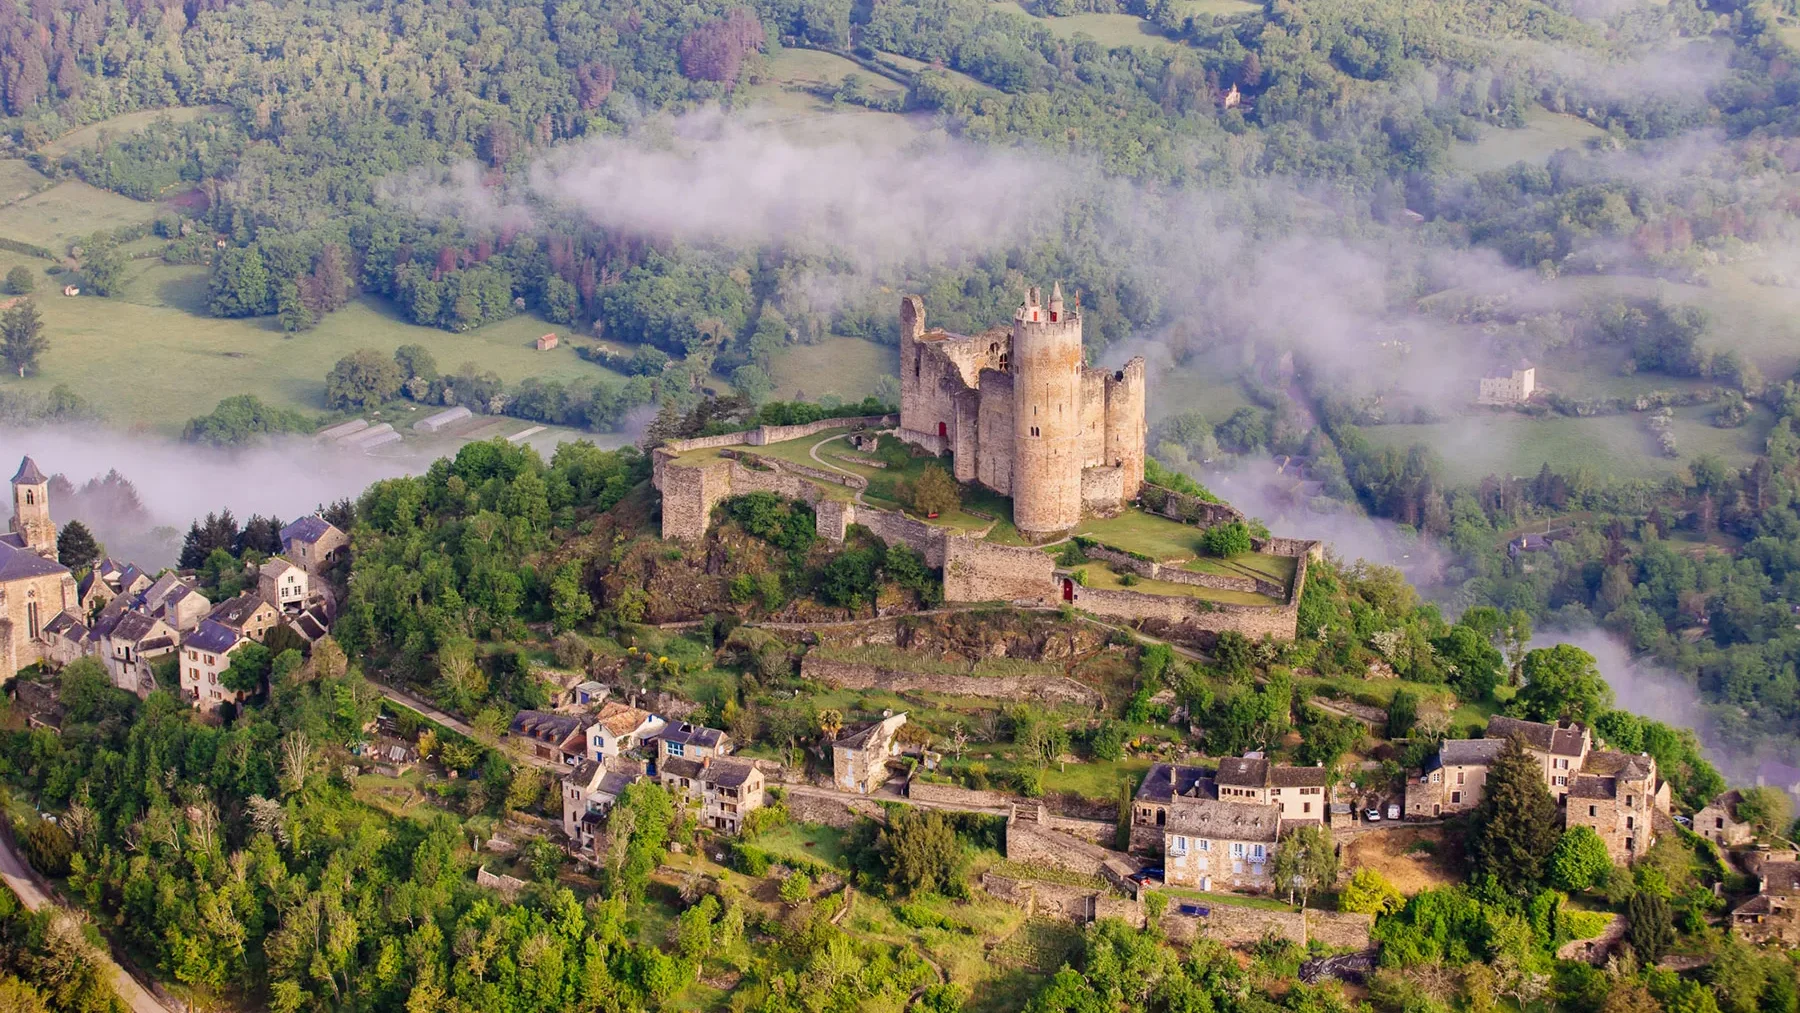 Our must-sees: the fortress of Najac